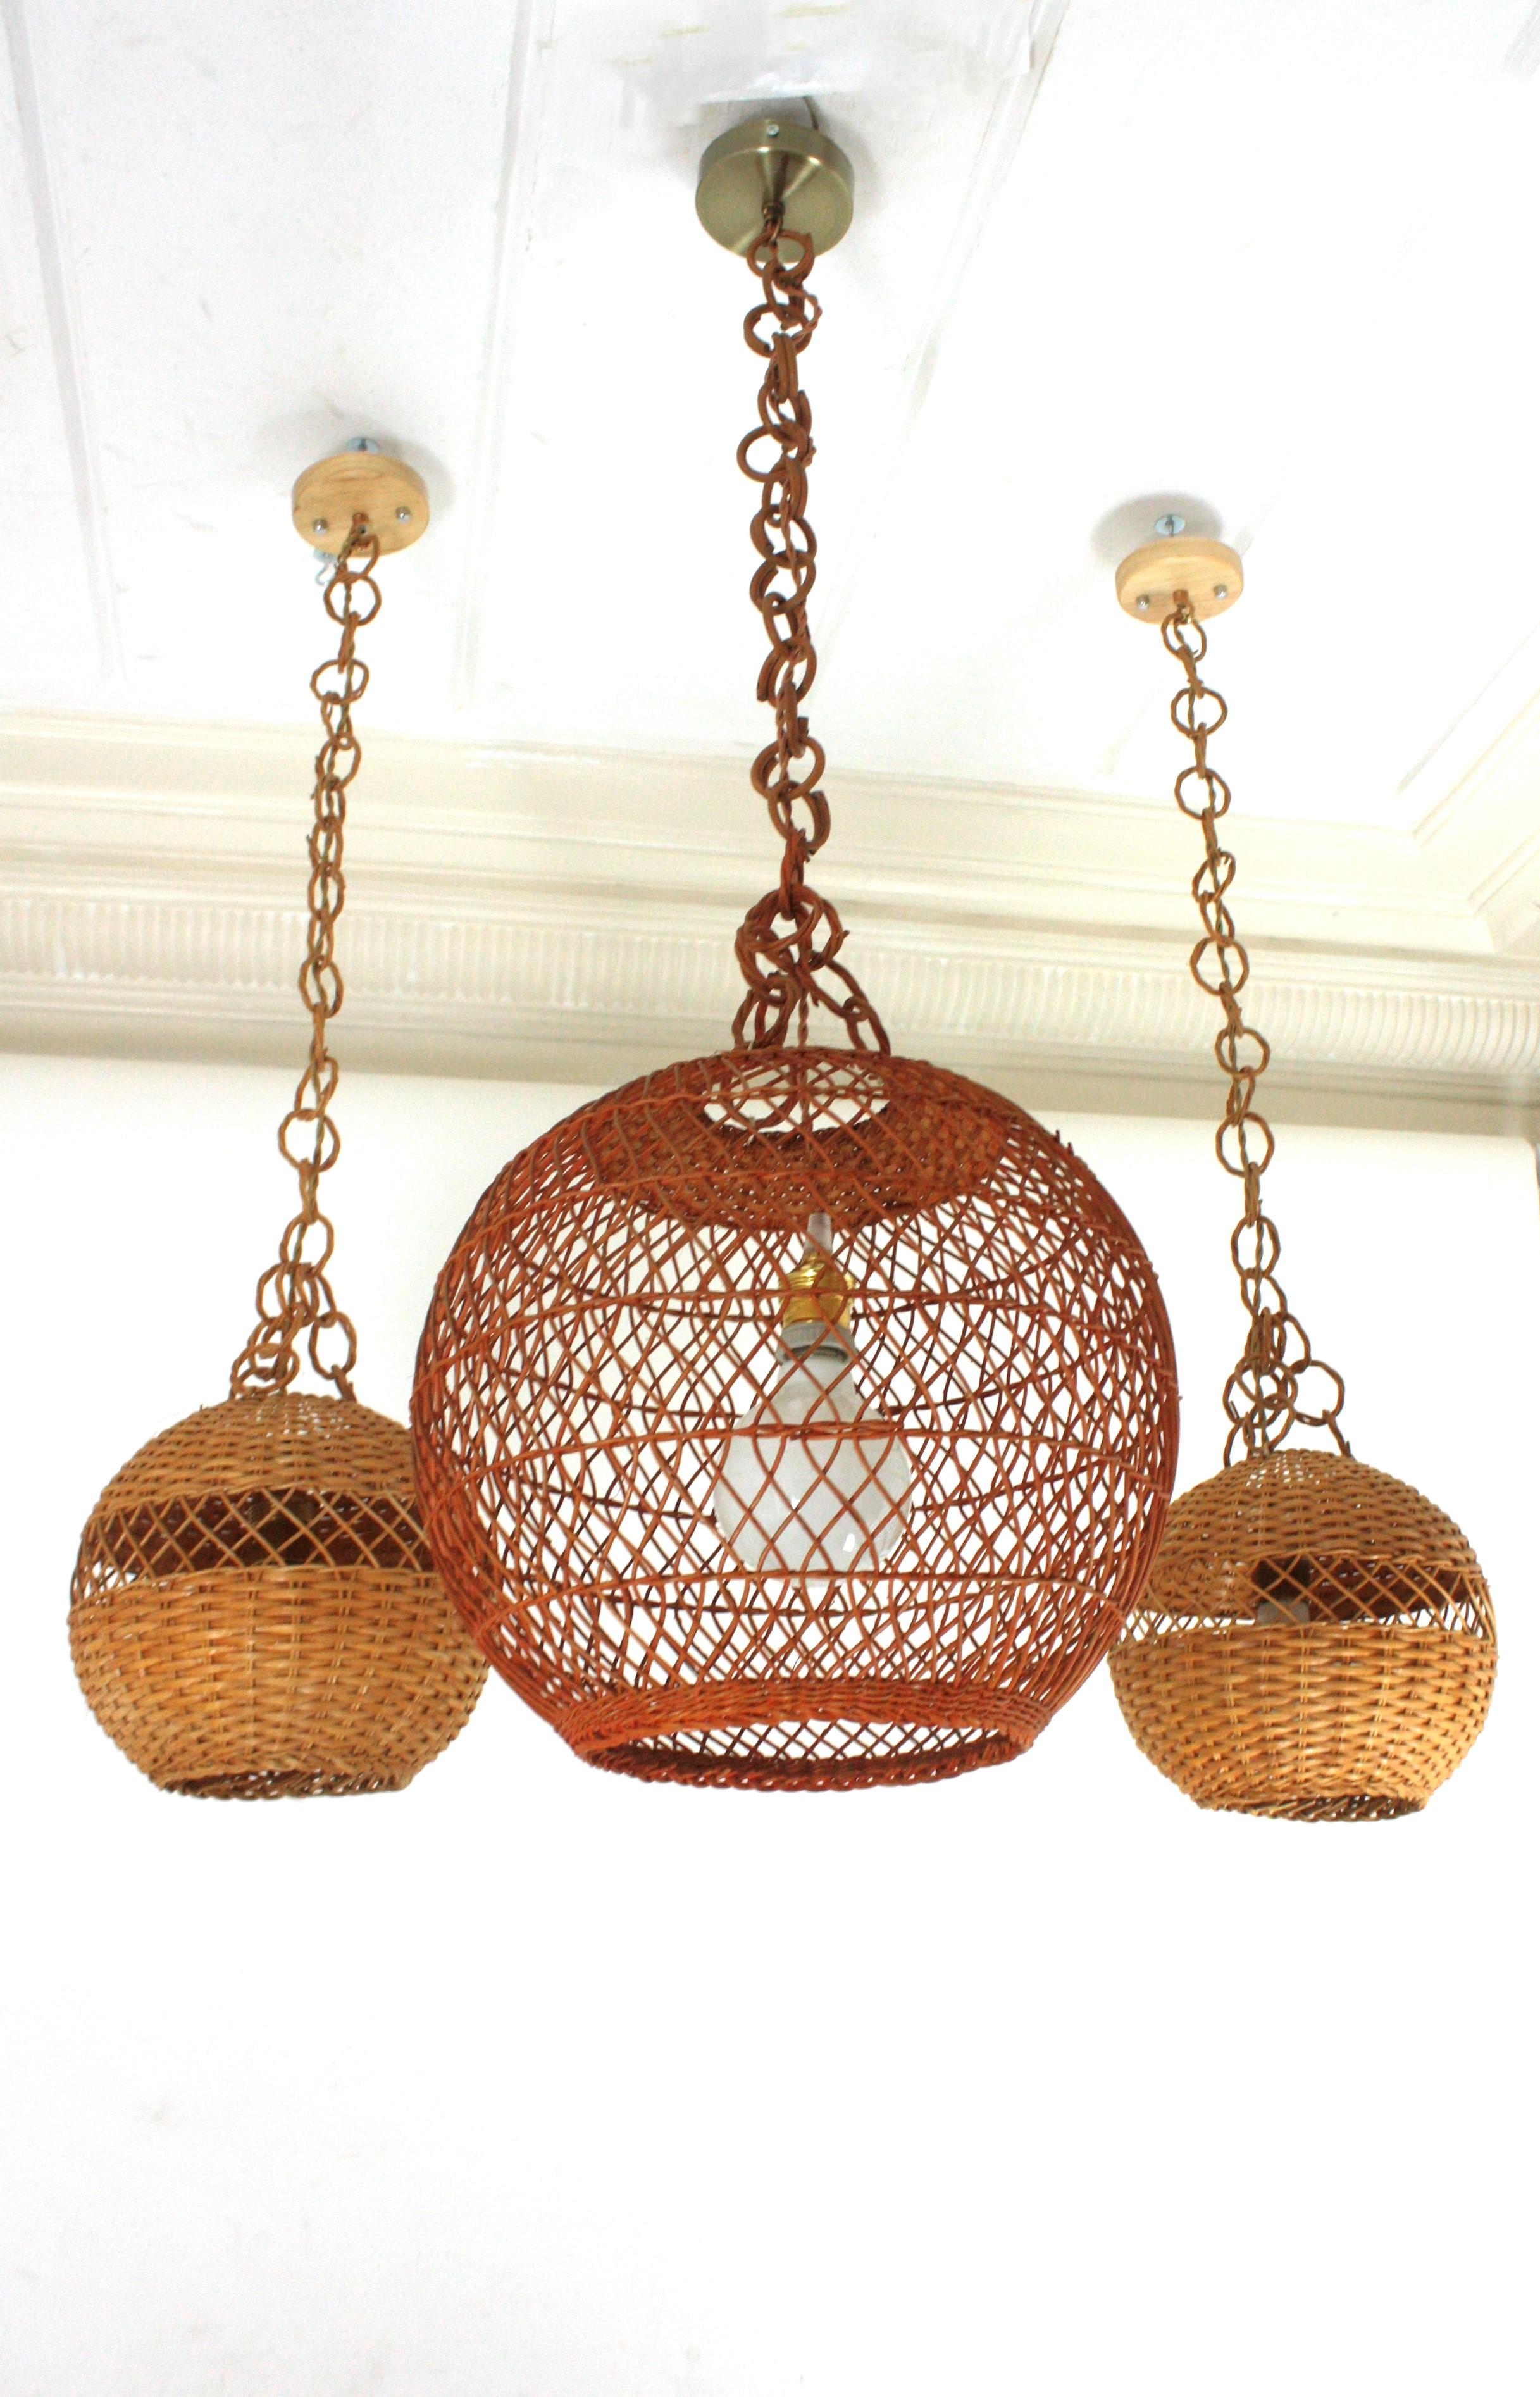 Hand-Crafted Pair of Handwoven Wicker Globe Pendant Lights or Lanterns For Sale